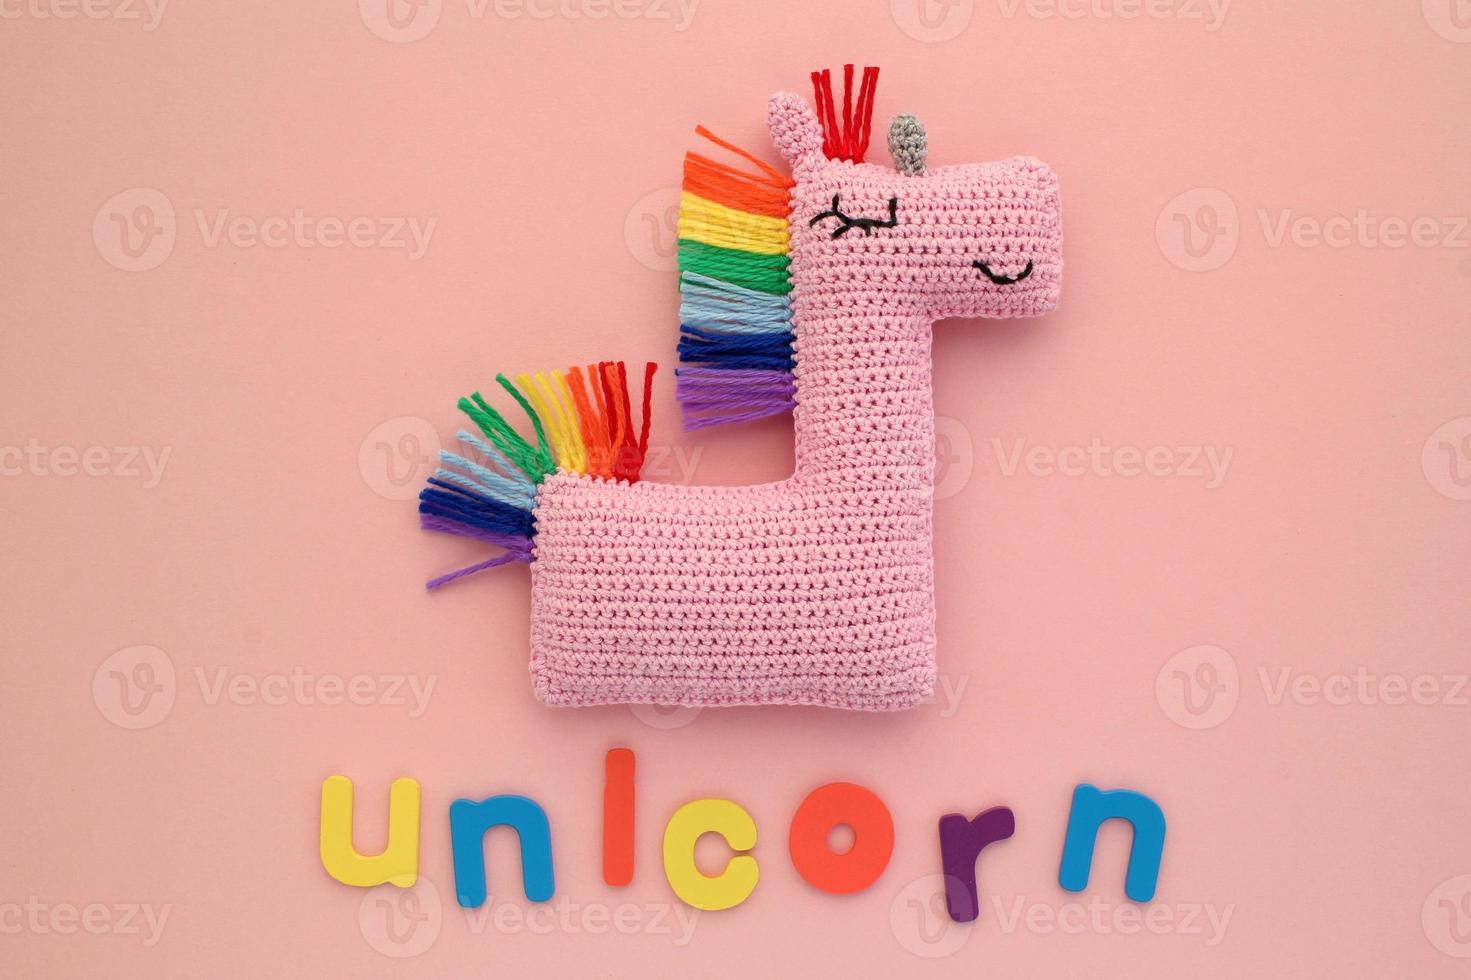 Crochet amigurumi handmade stuffed soft pink unicorn toy with rainbow mane and word on pink background. Handwork hobby. Craft diy newborn pregnancy concept. Knitted doll for little baby. Flat lay photo